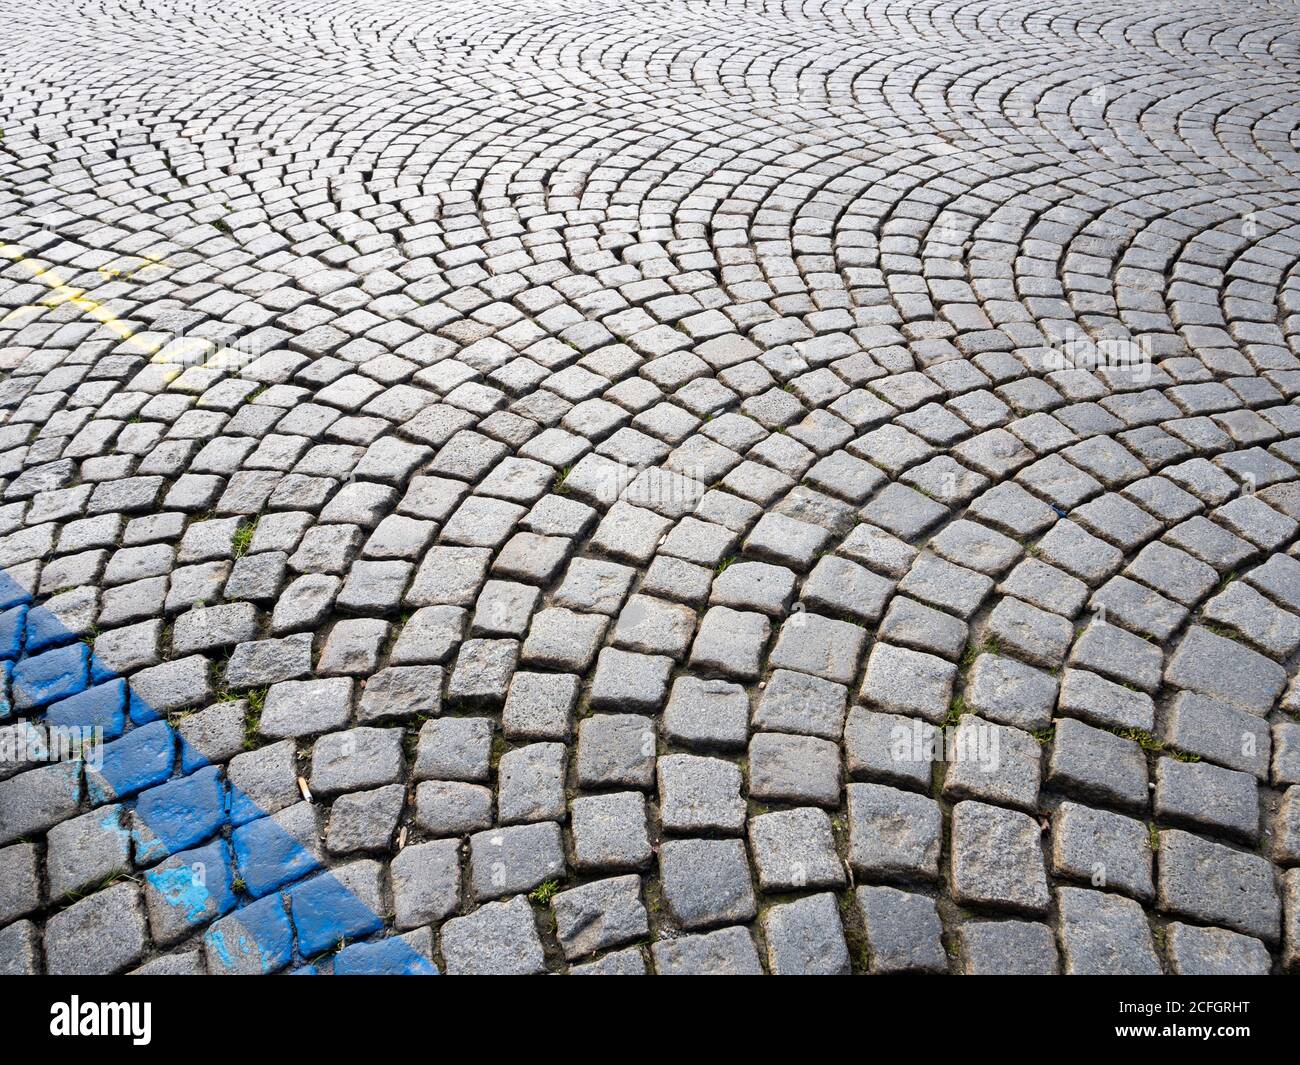 Concentric Cobble Curves: A series of concentric circles form a pattern on a cobbled street in the castle district in Prague. Pavement markings brighten up some stones. Grass sprouts. Stock Photo